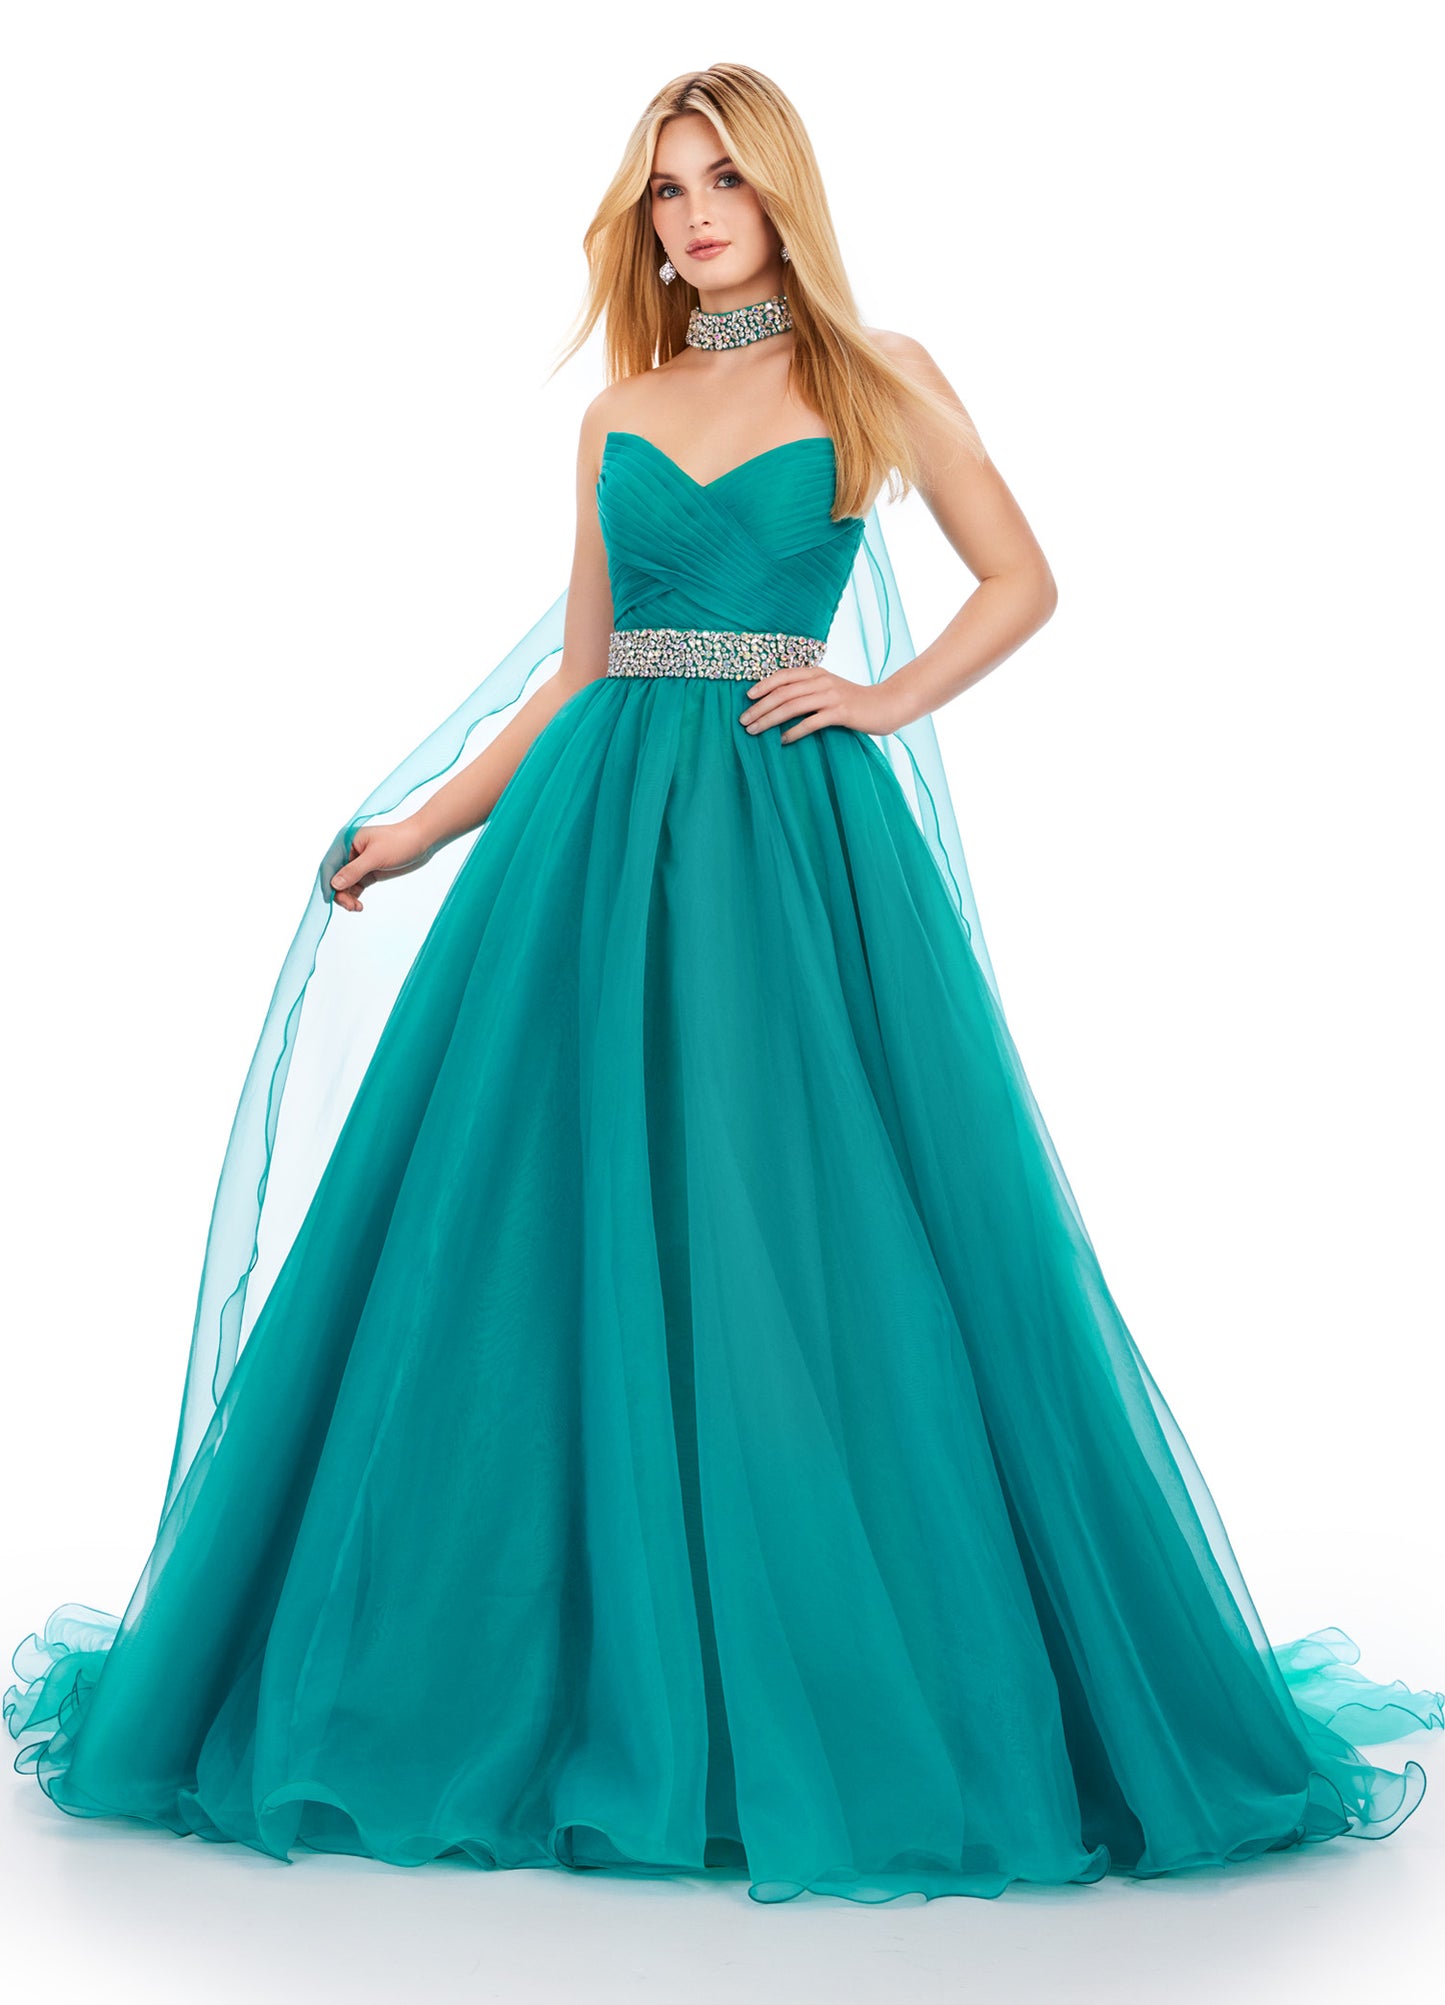 The Ashley Lauren 11565 Long Prom Dress is a stunning organza ball gown that features a beaded choker and a flowing cape, perfect for formal events or pageants. With its intricate beading and elegant design, this dress will make you feel like a true princess. A dress sure to make you feel like a queen. This strapless organza ball gown features a beaded waist band. The look is finished with a beaded choker and organza cape.